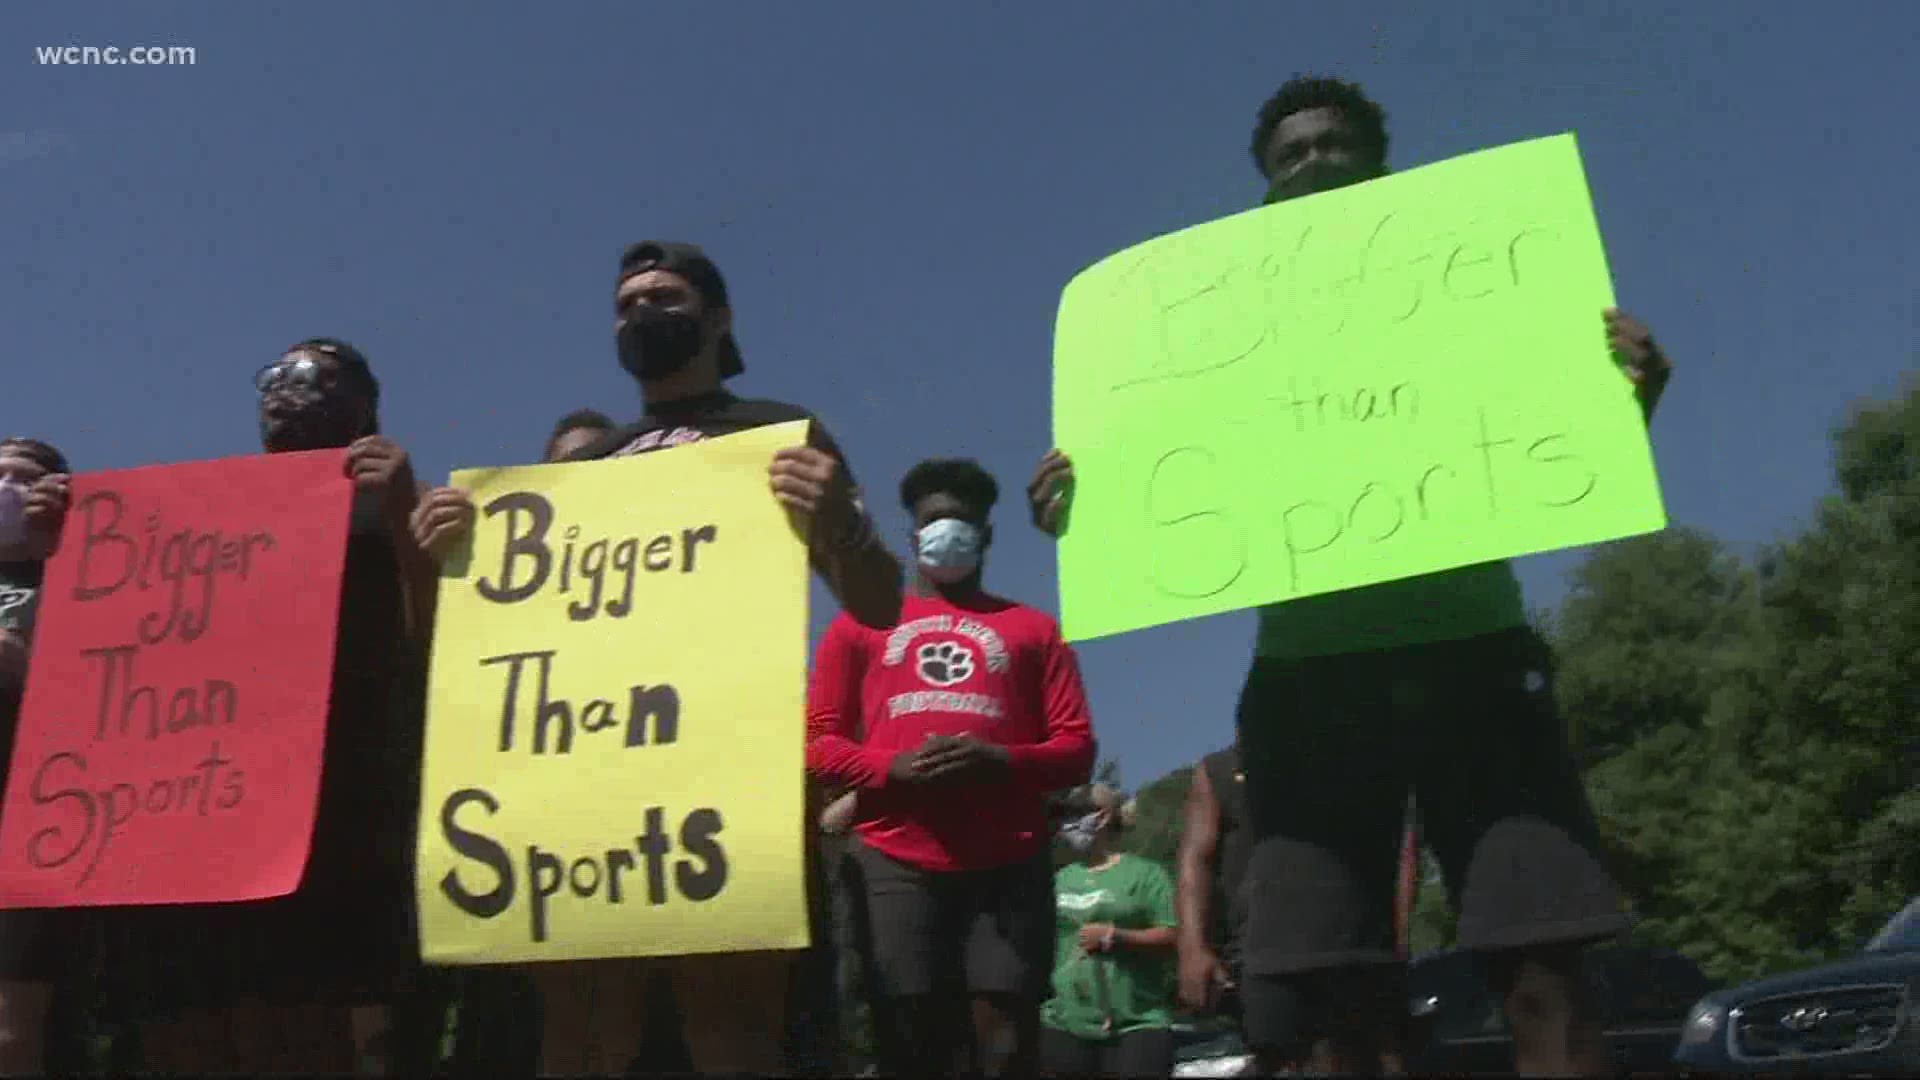 Student-athletes were led by Myers Park QB Drake Maye to protest wanting Fall sports.